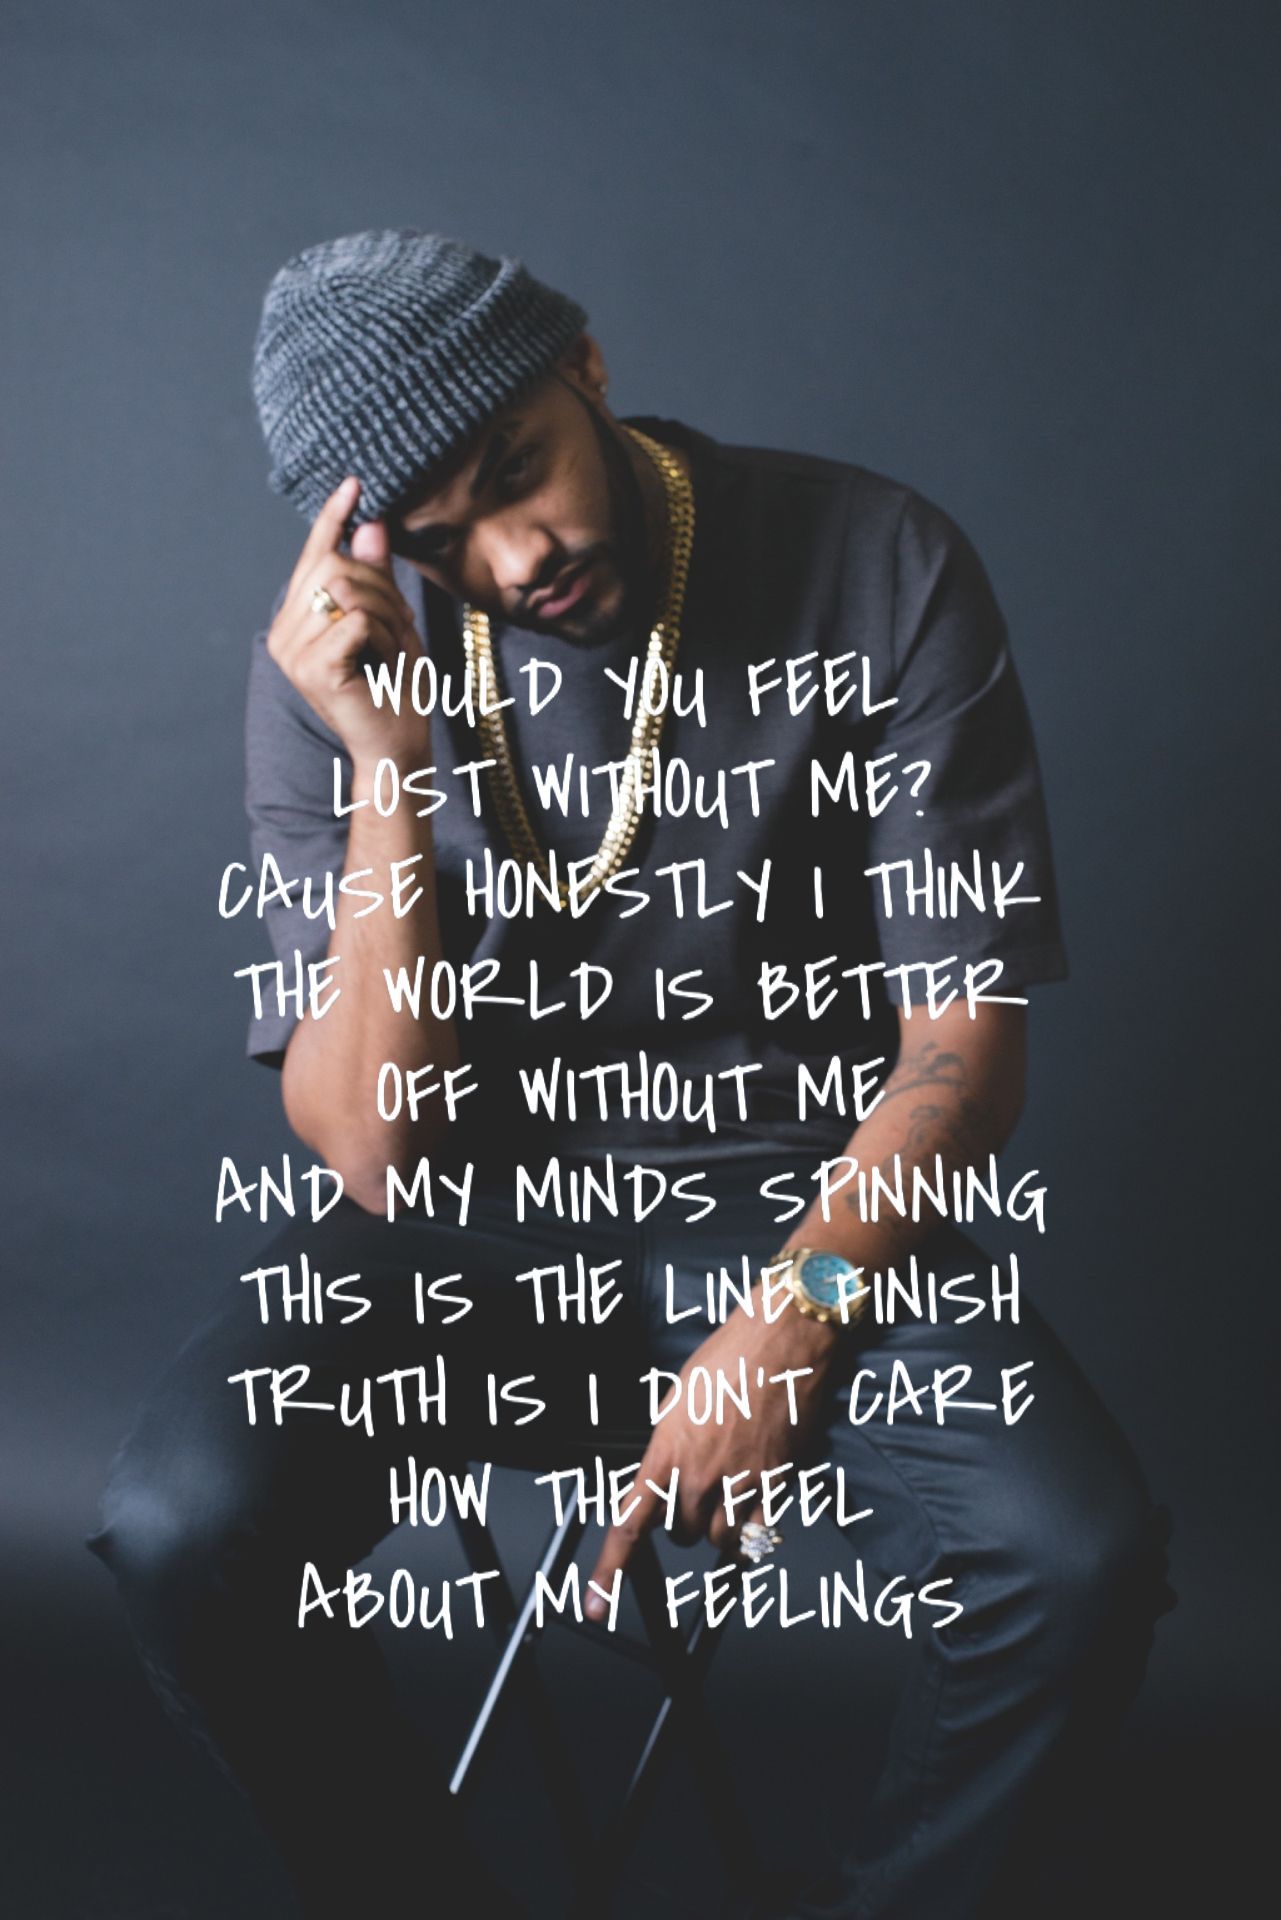 Joyner Lucas wallpaper Quote- would you feel lost without me? Cause honestly, I think the world is better off without me. Joyner lucas, Rap quotes, Rapper quotes